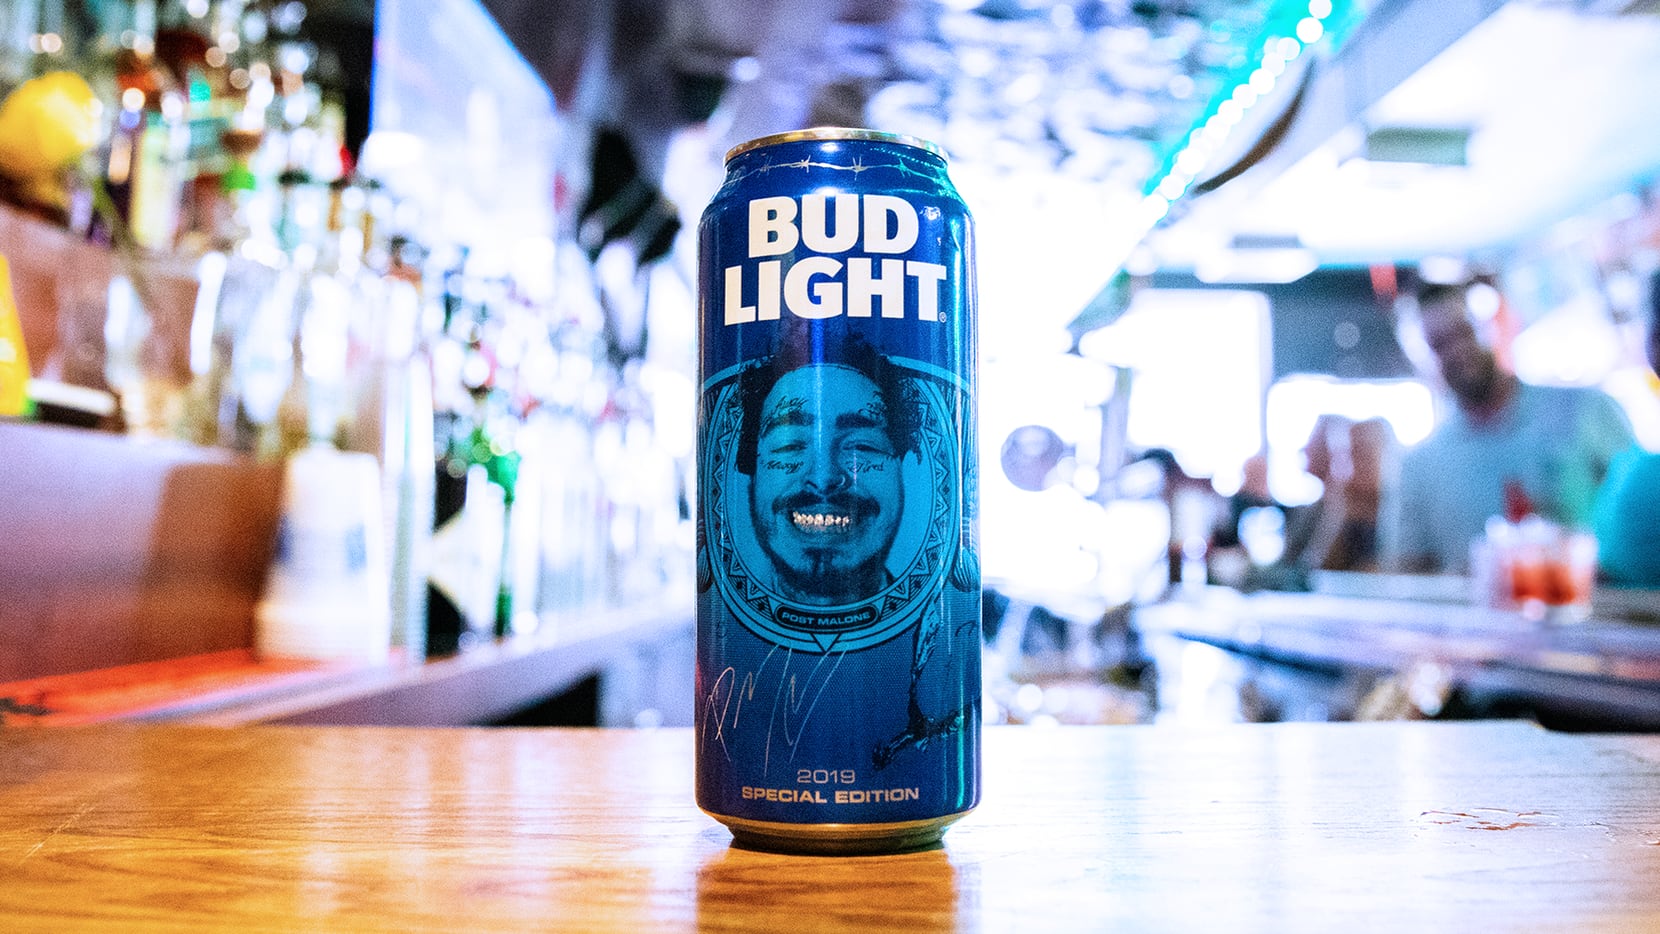 Post Malone's face is printed on Bud Light cans in 2019.